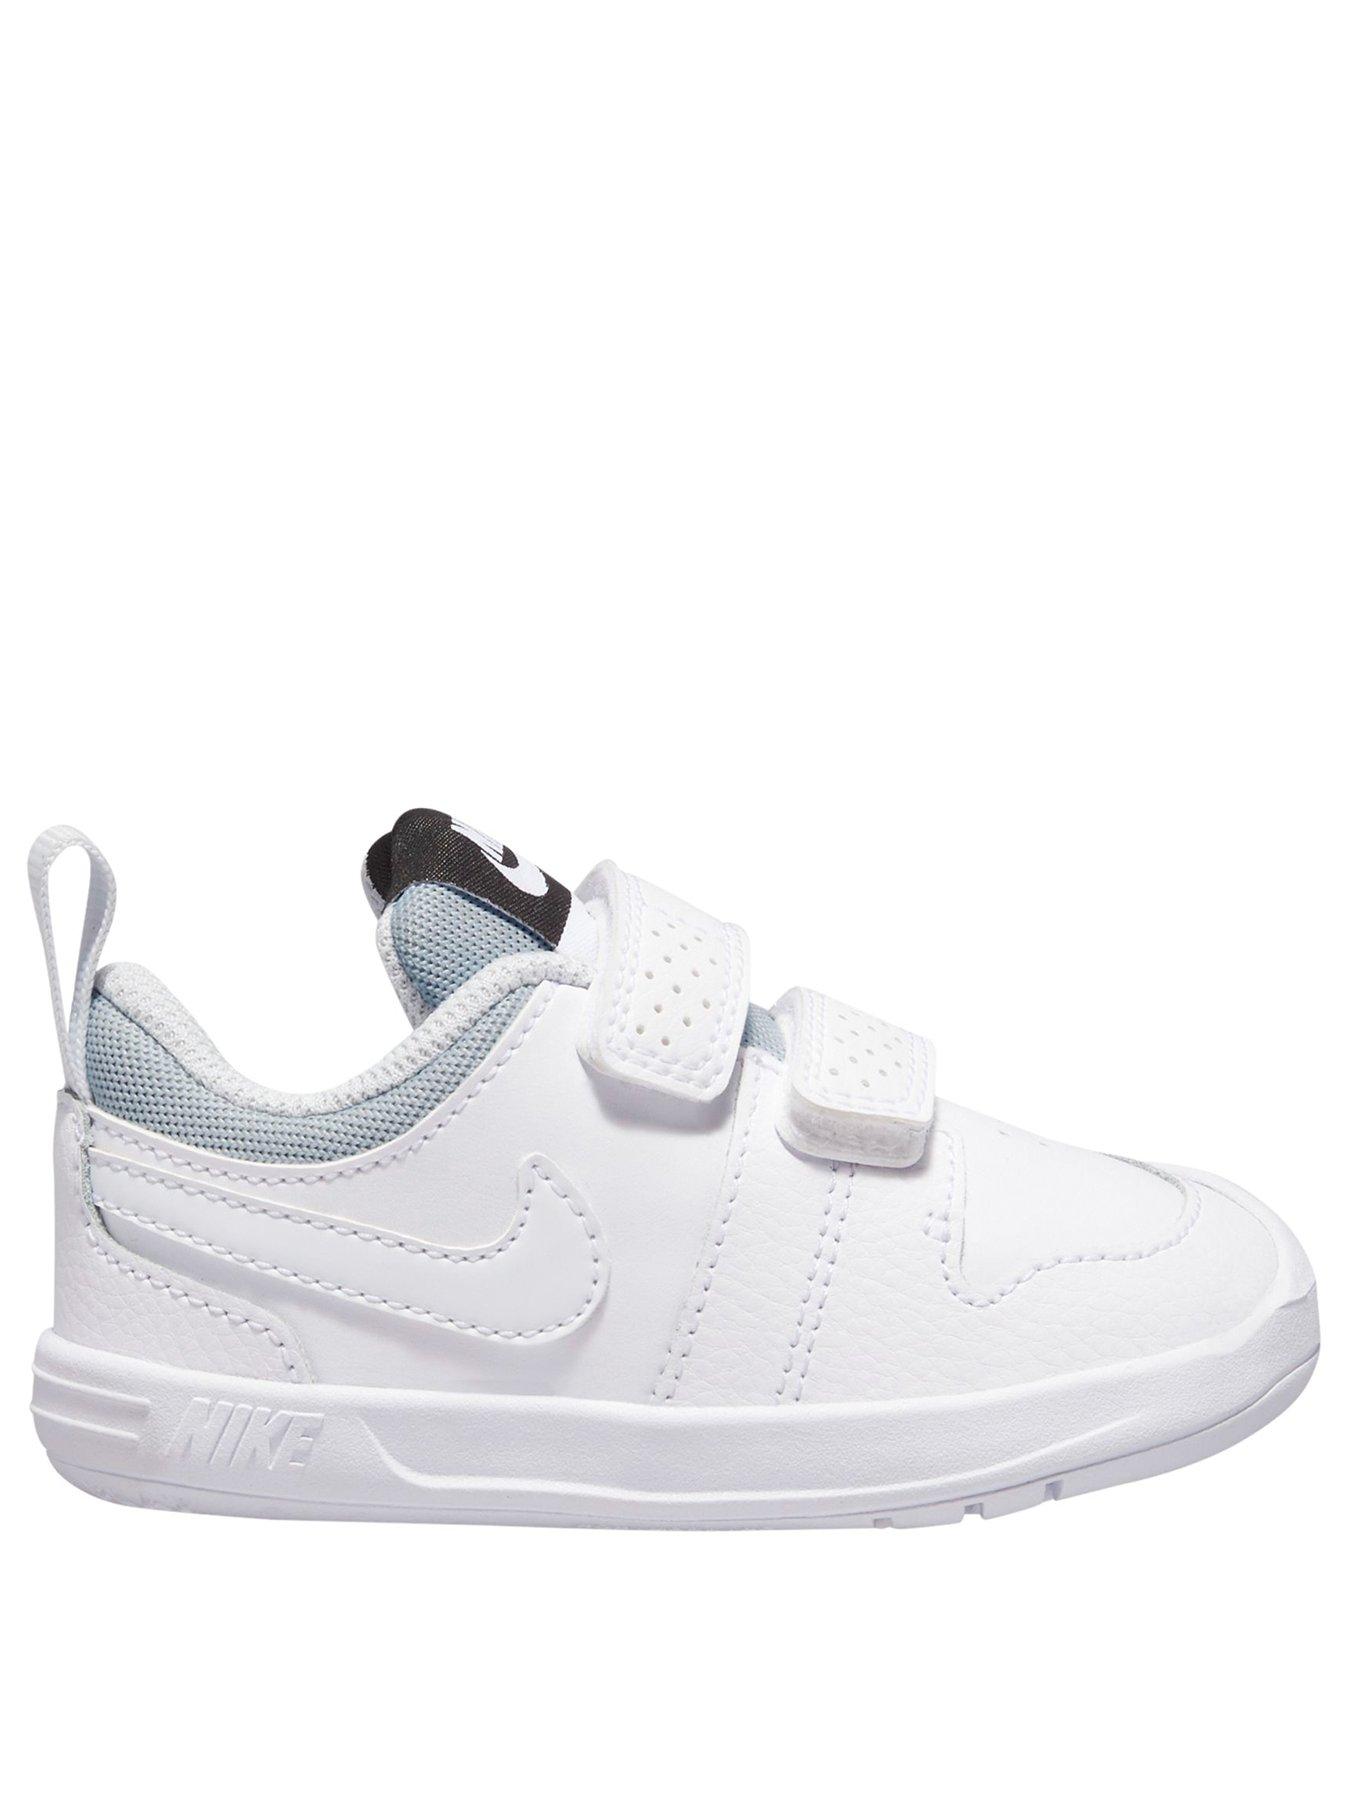 infant nike trainers